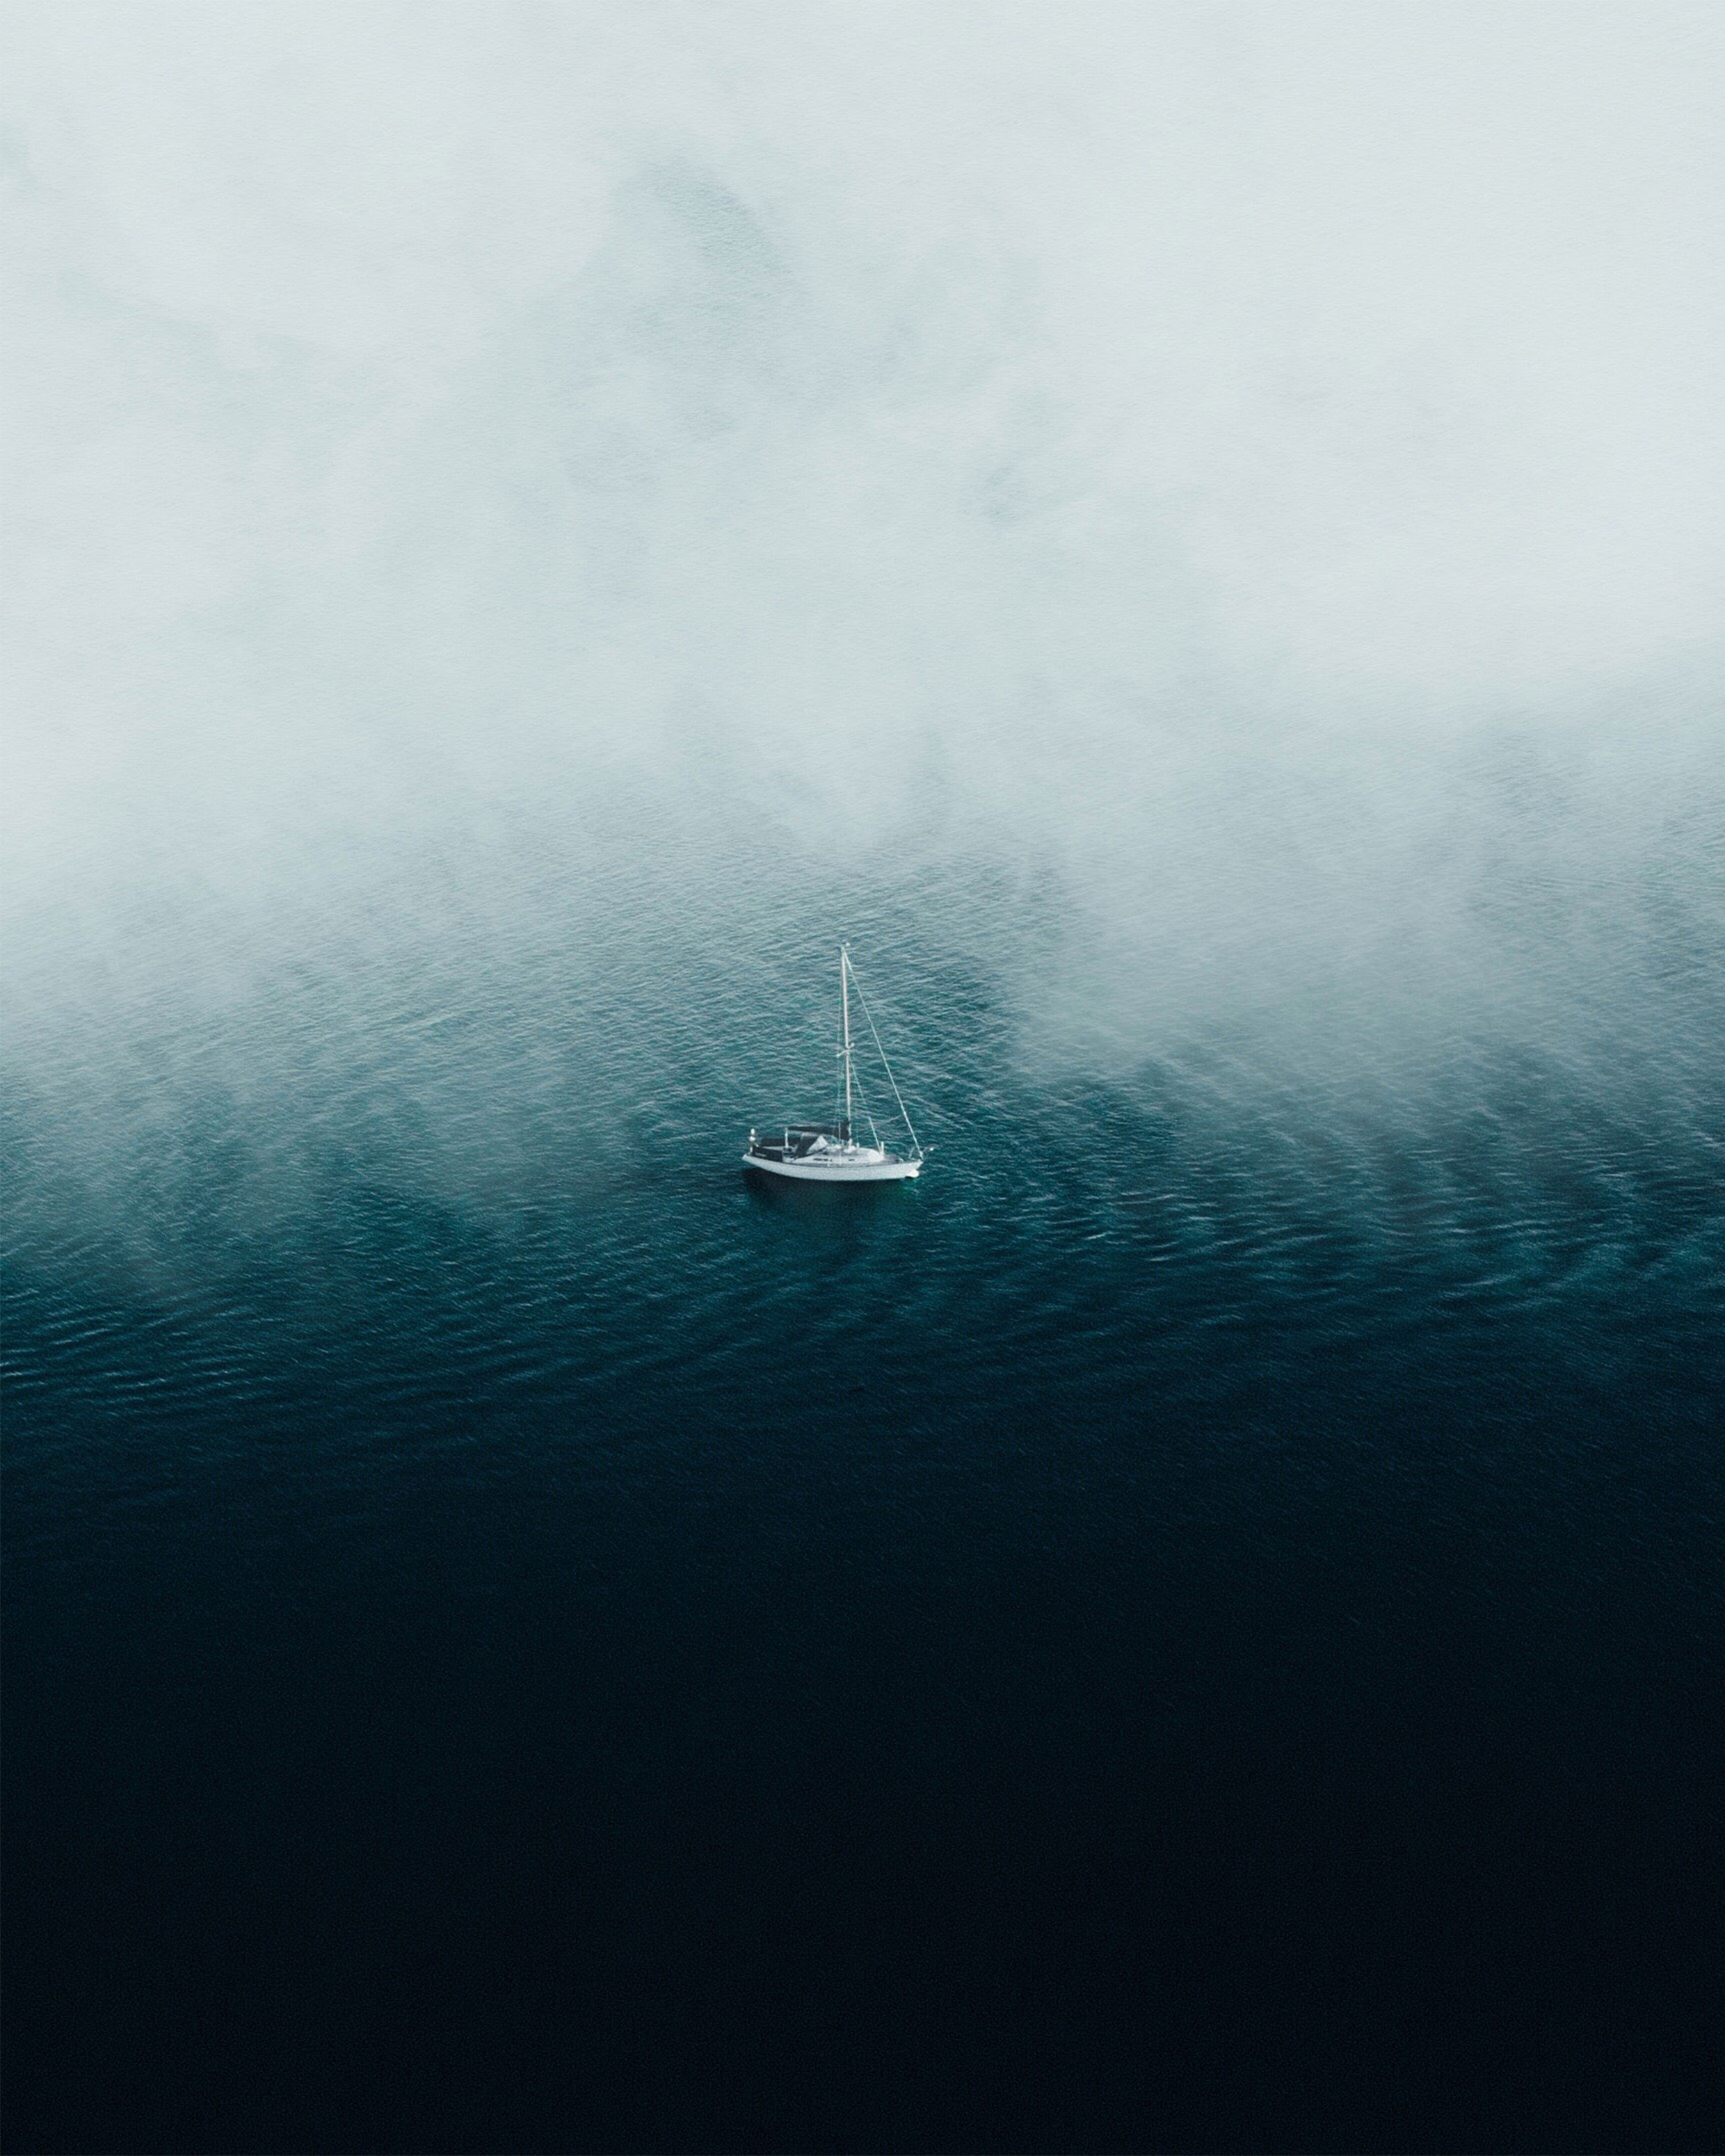 Mobile wallpaper: Fog, Ocean, Lonely, Boat, Minimalism, Alone, 96591  download the picture for free.